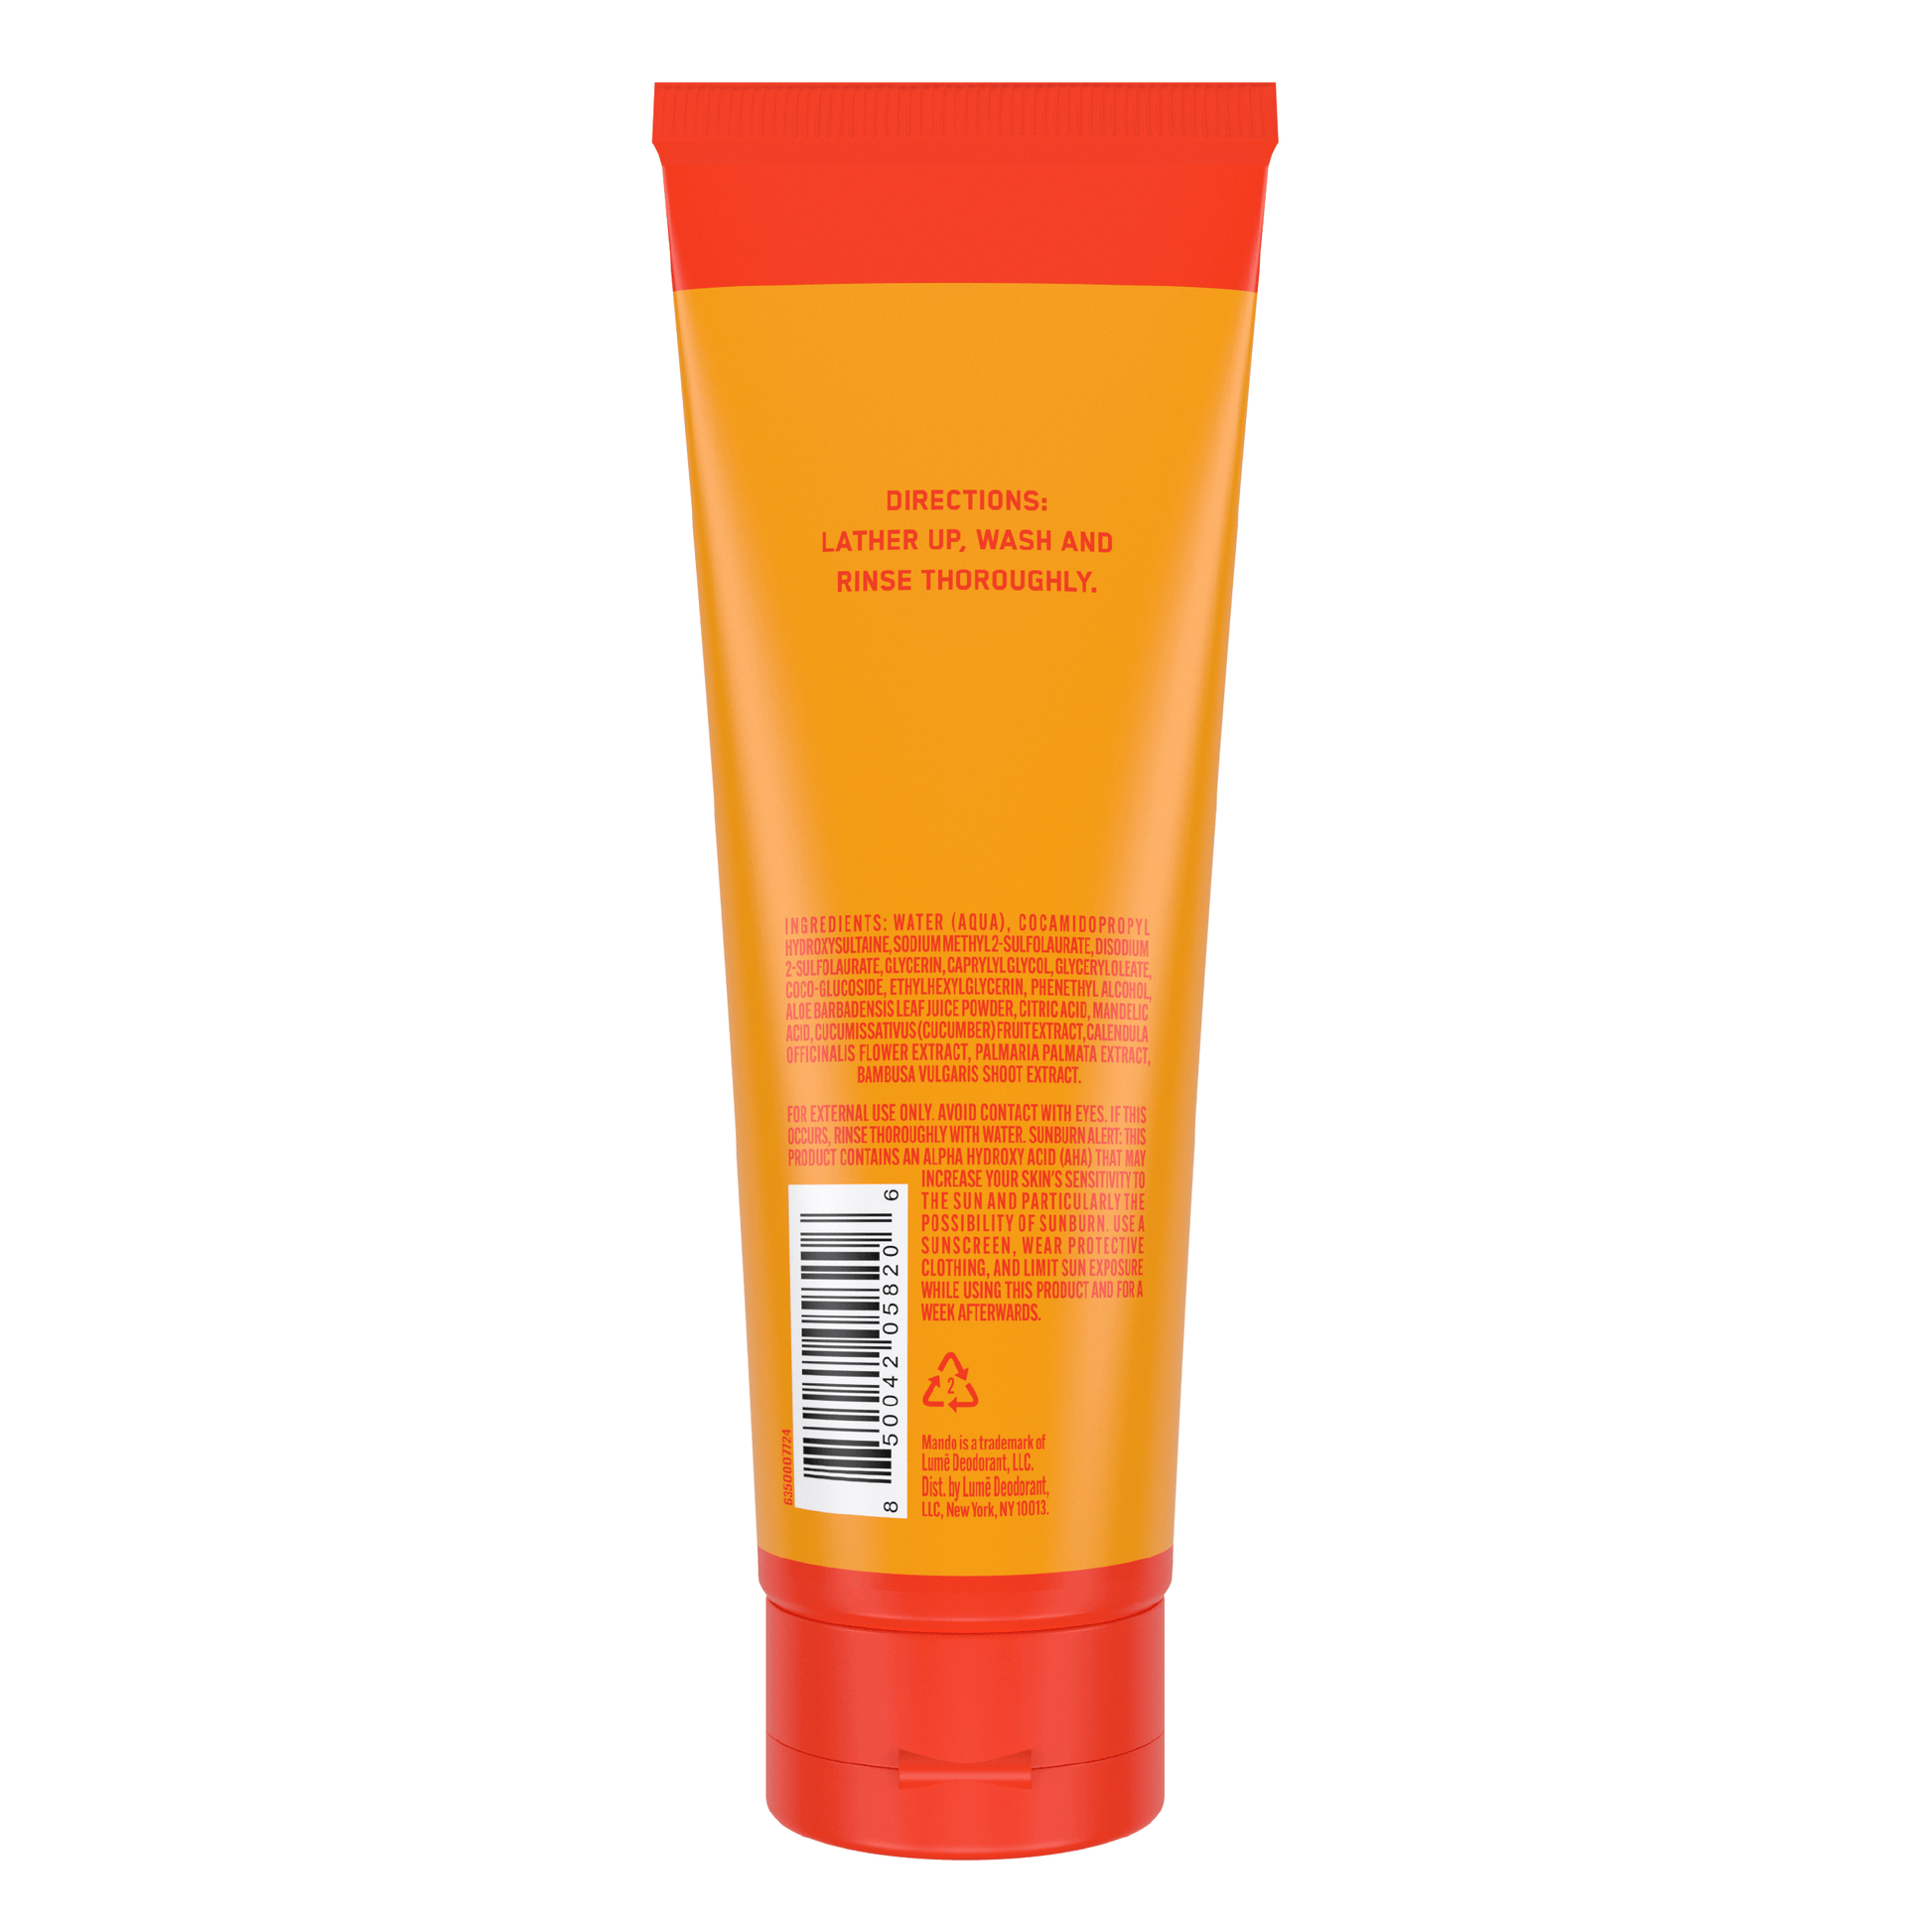 Yellow orange tube of Mando body wash in bourbon leather scent on white background with directions text